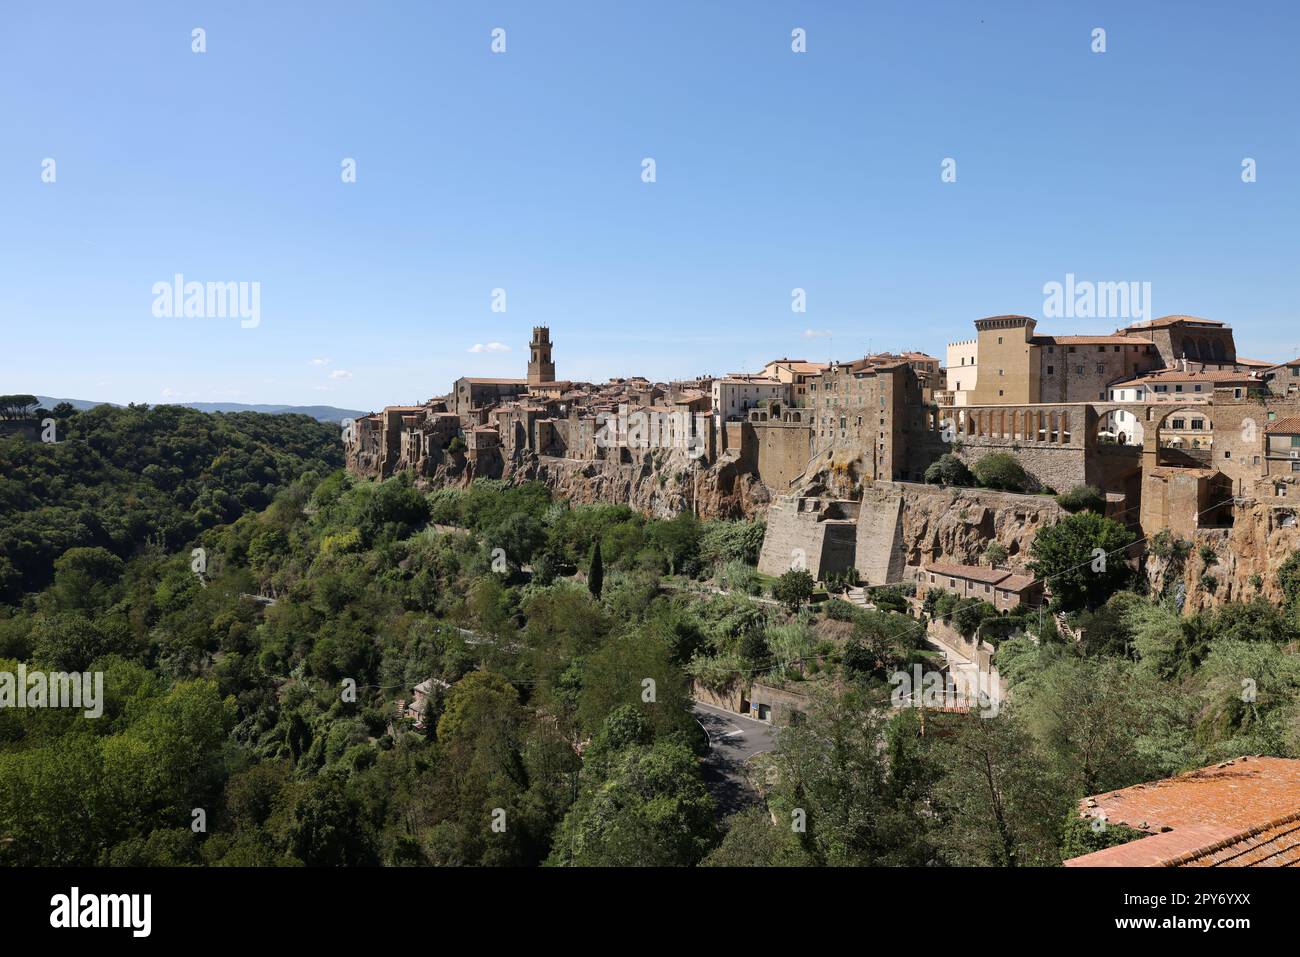 Pitigliano charming medieval town in Tuscany, Italy. Stock Photo